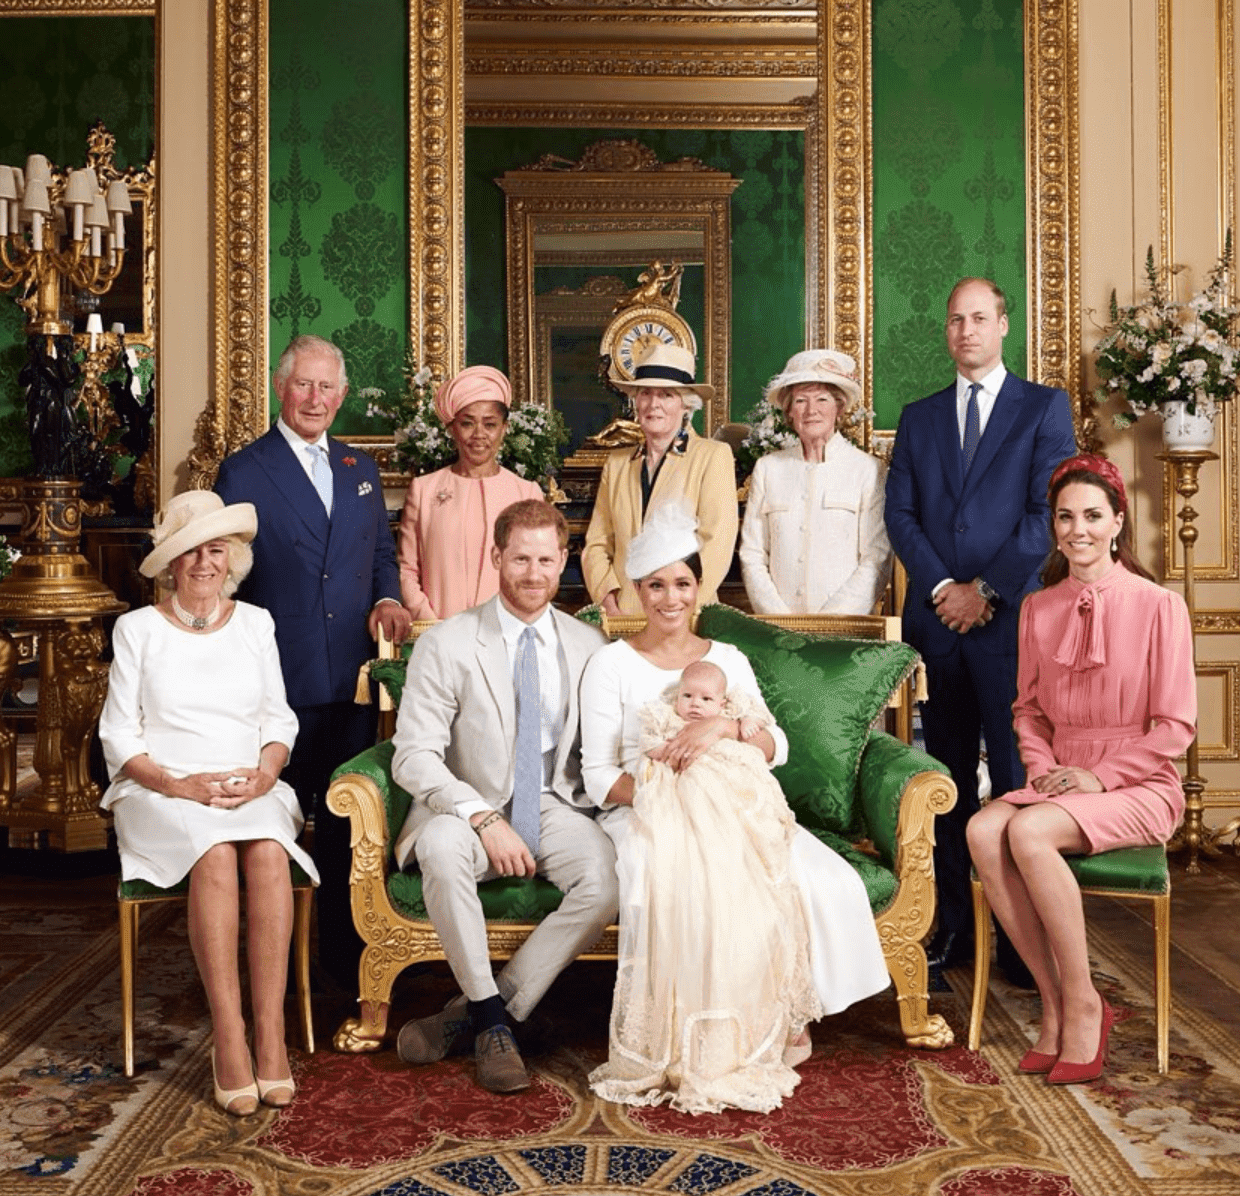 From left to right: The Duchess of Cornwall, The Prince of Wales, Ms Doria Ragland, Lady Jane Fellowes, Lady Sarah McCorquodale, The Duke of Cambridge and The Duchess of Cambridge. The Duke and Duchess of Sussex are the the centre with Archie. | Source: Instagram/SusseRoyal